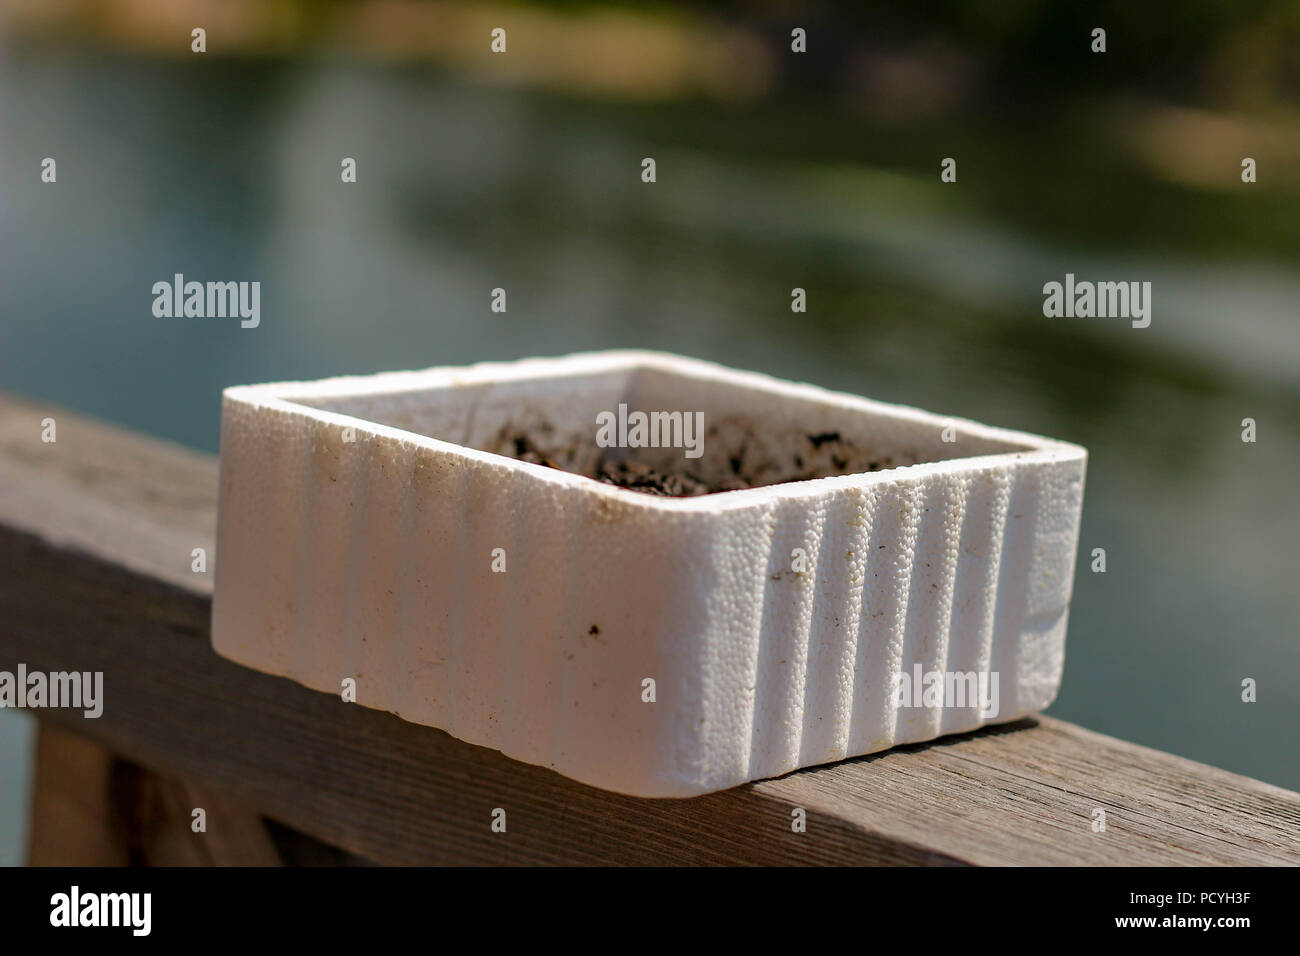 A styrofoam bait worm container on a ledge next to a lake ready to